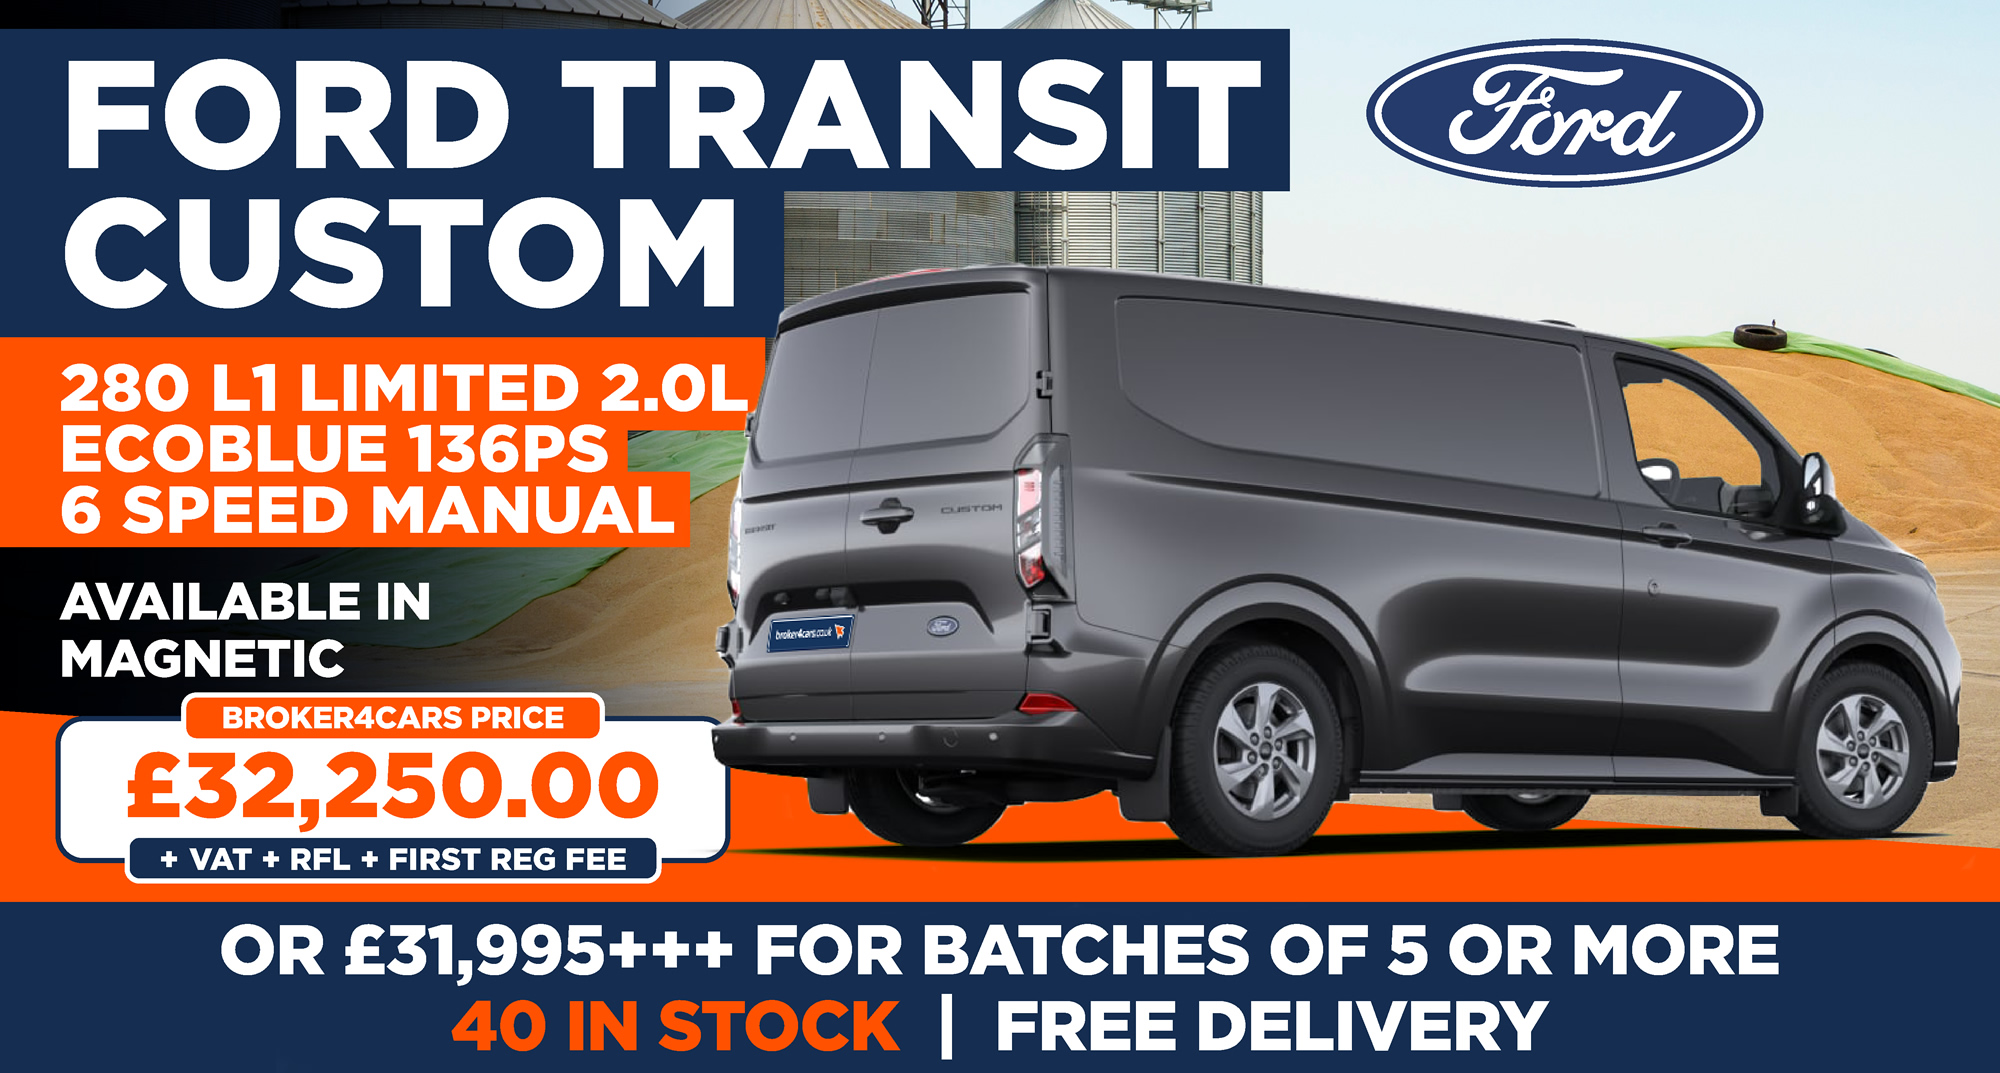 FORD TRANSIT CUSTOM 280 L1 Limited 2.0l EcoBlue 136ps 6 speed manual MagneticALL IN STOCK WITH FREE DELIVERY. 40 in Stock. All above prices are + VAT + RFL + 1st Reg Fee